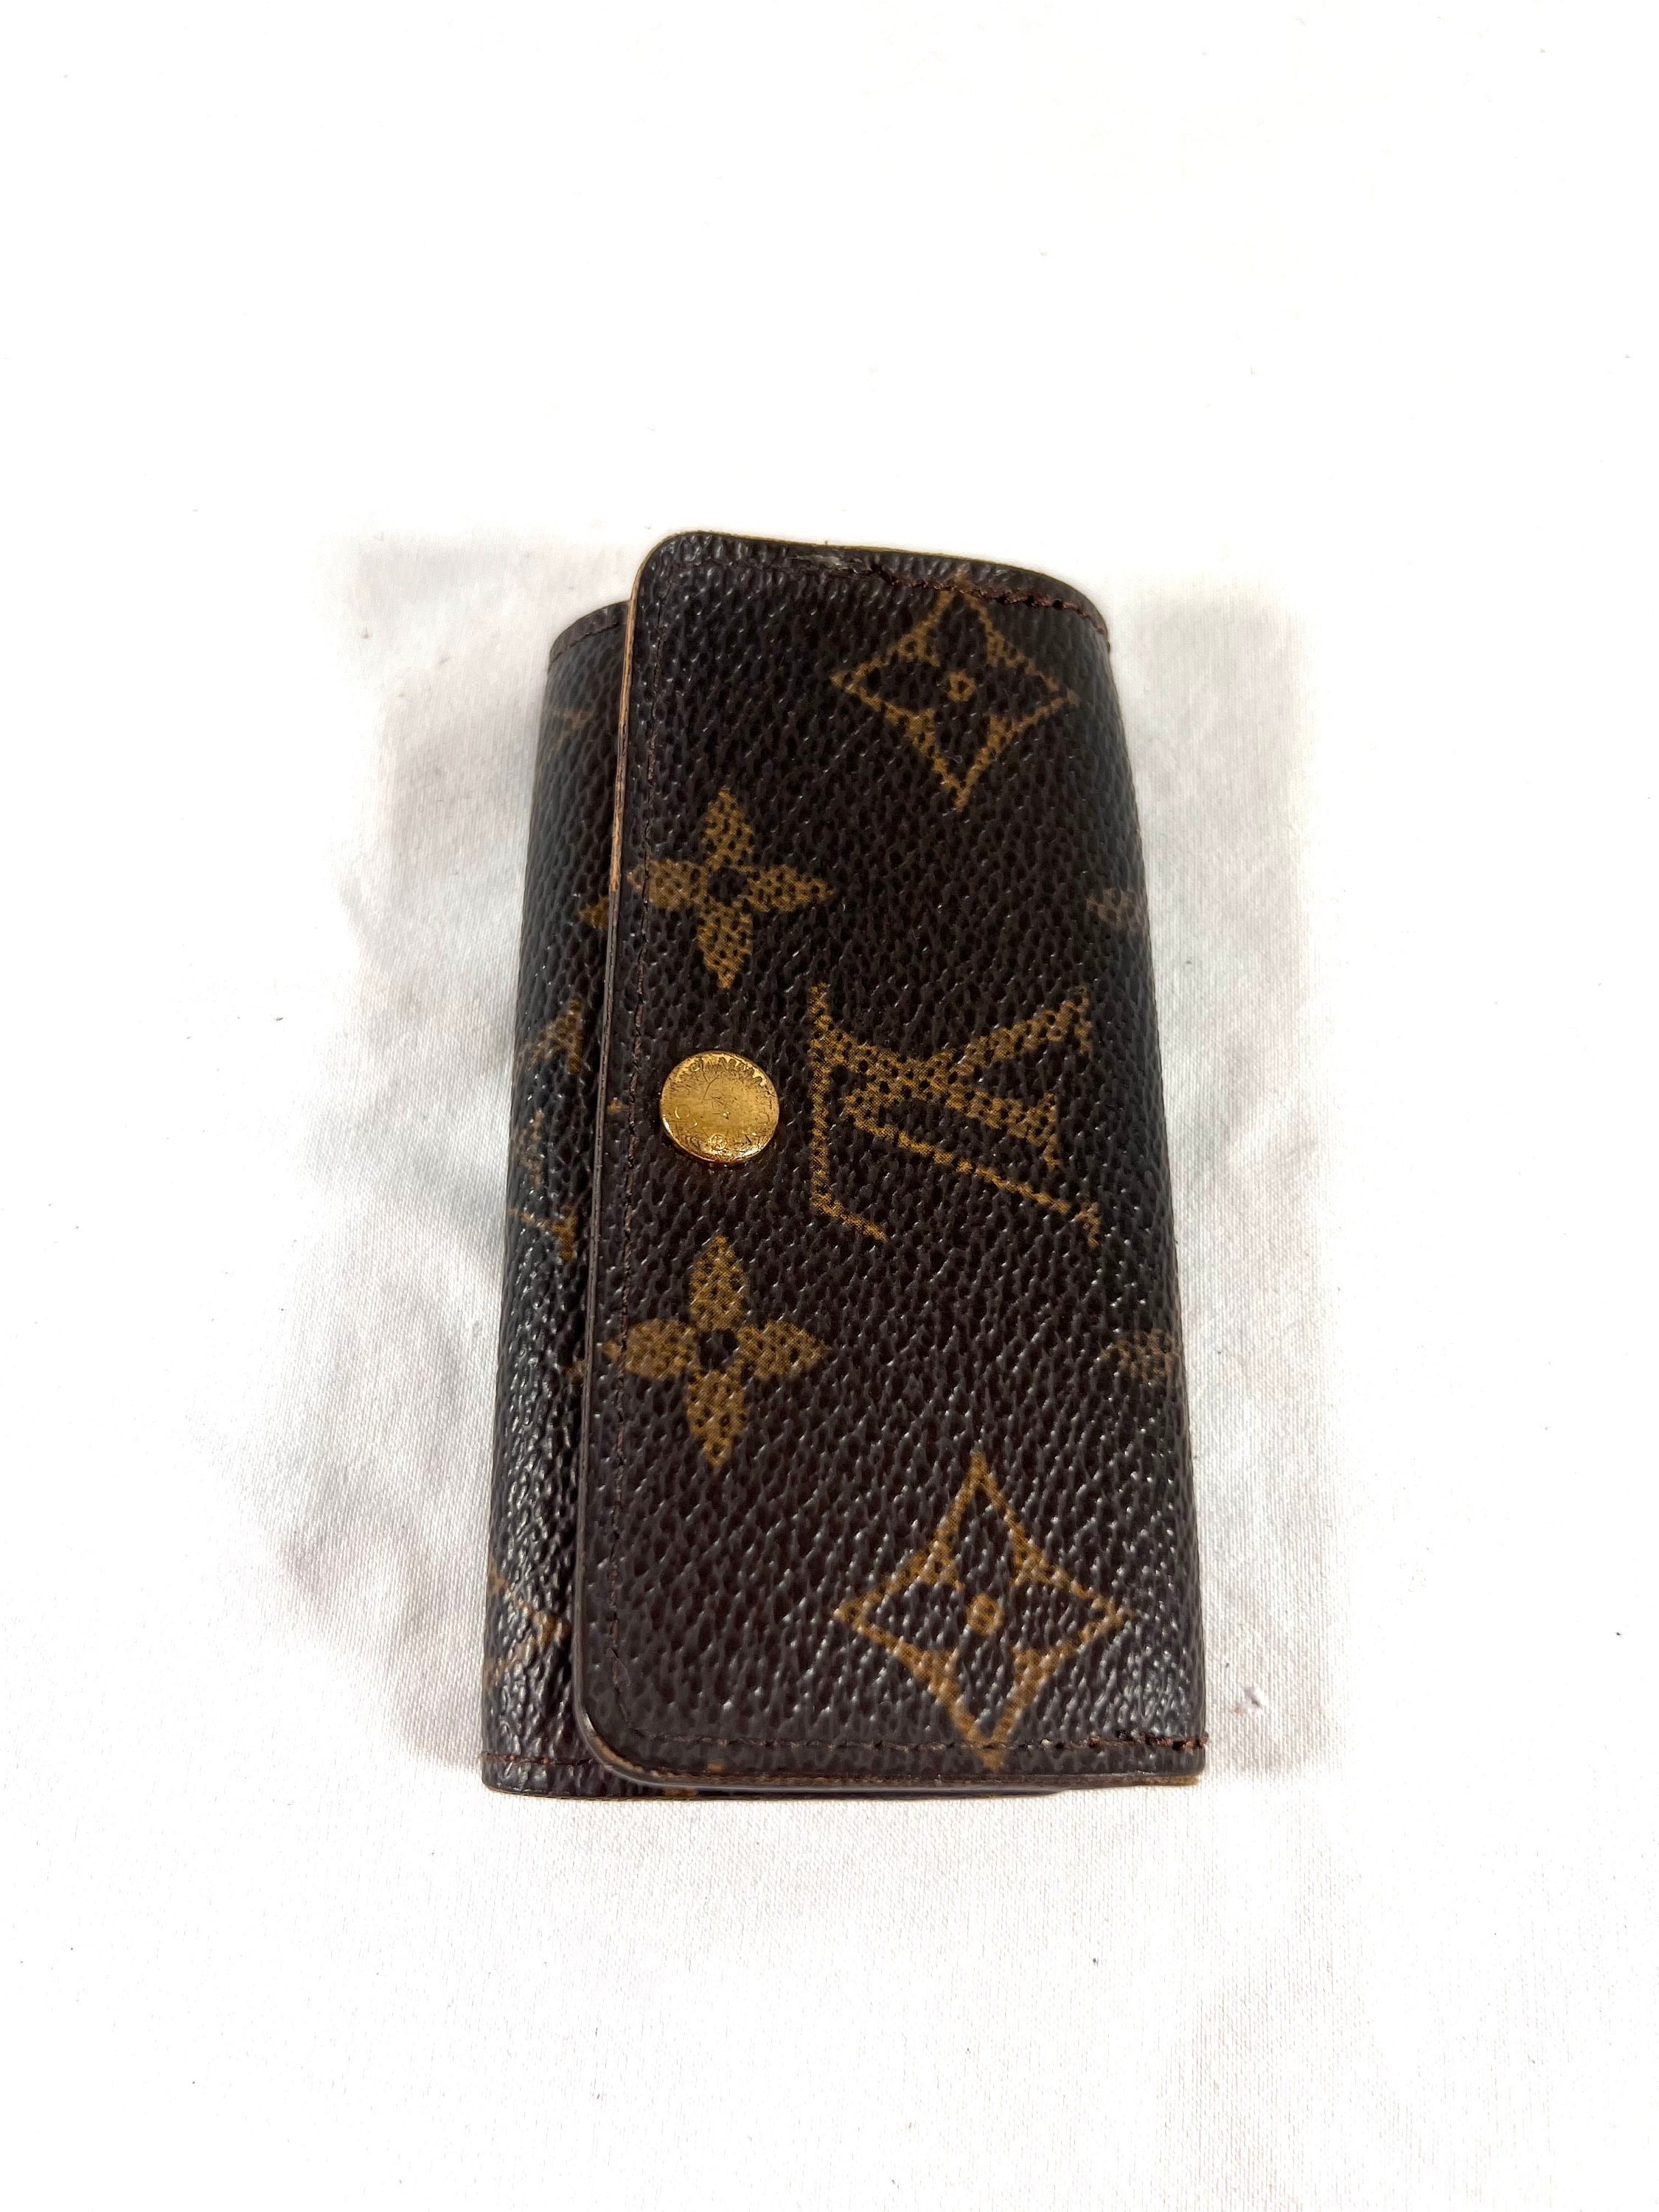 Buy Louis Vuitton Key Holder Online In India -  India